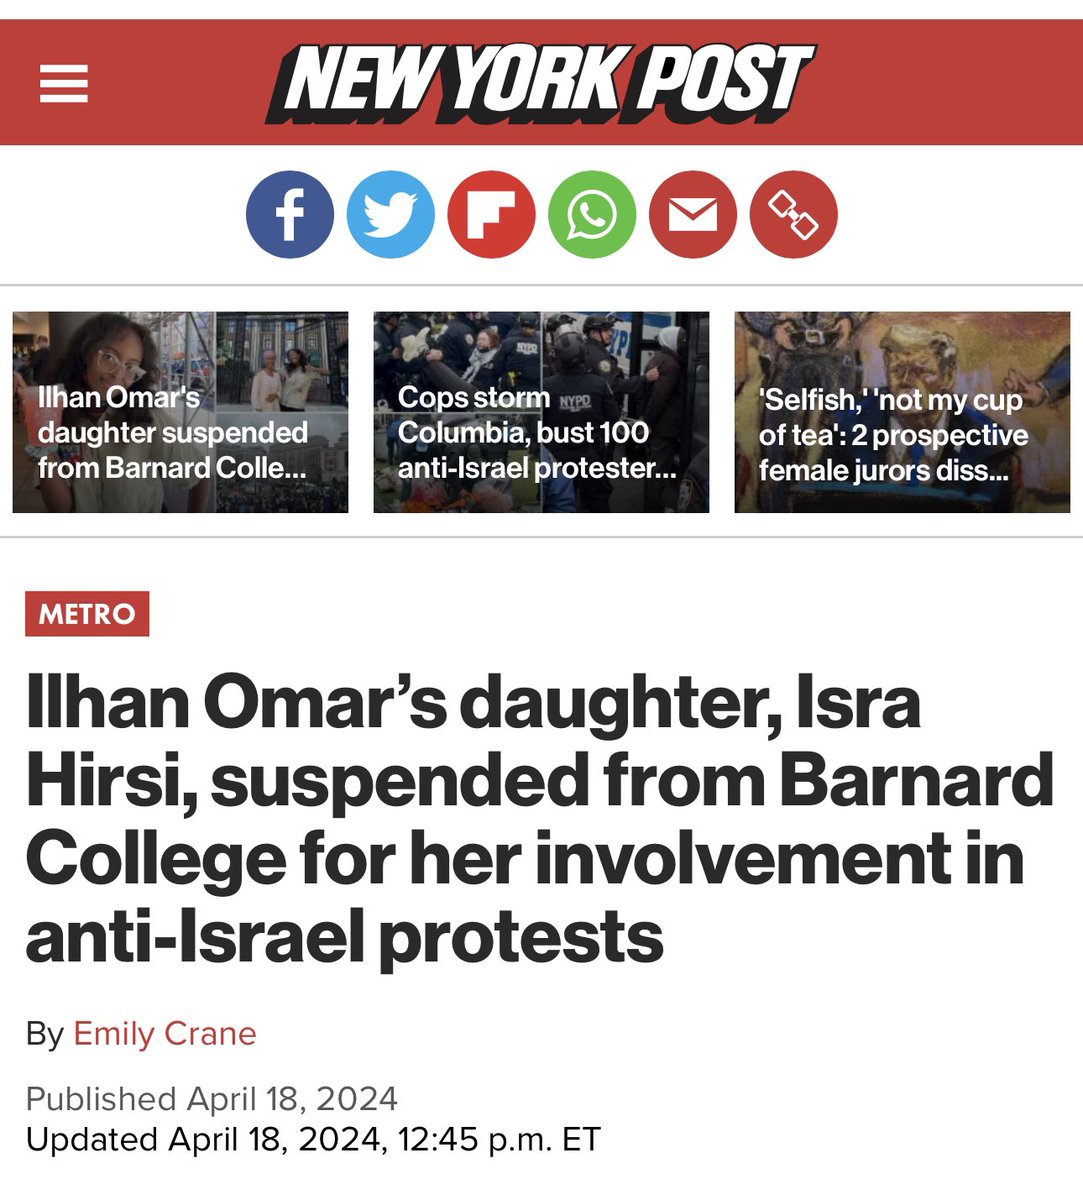 Why was Ilhan Omar allowed to participate in the Columbia Congressional Hearing on Antisemitism when her daughter was under investigation for organizing the anti-Jewish rallies that were THE SUBJECT OF THE HEARING?! #AntizionismIsAntisemitism